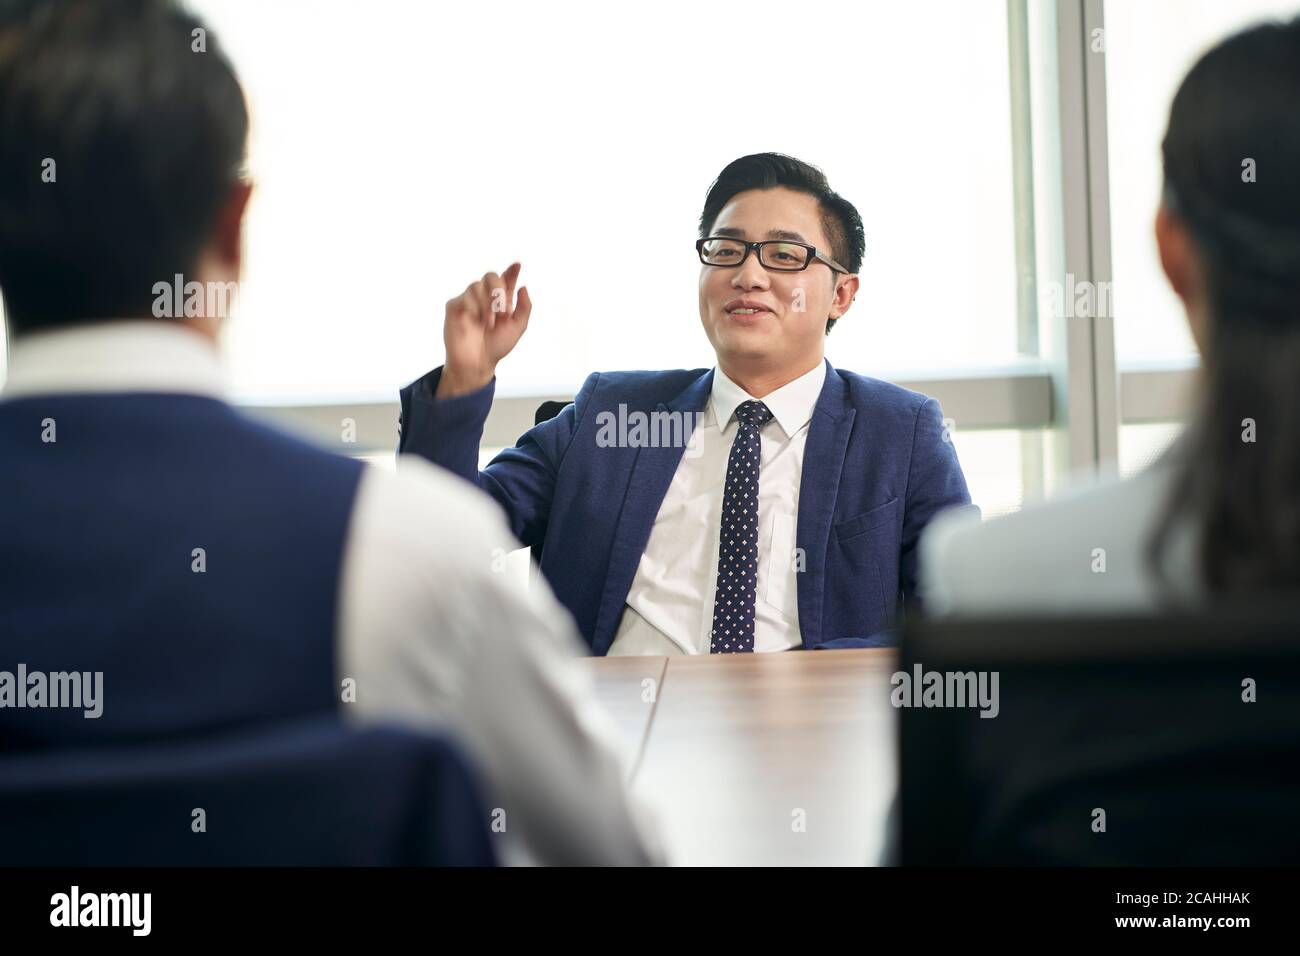 young asian business person talking big in front of hr interviewers during job interview Stock Photo